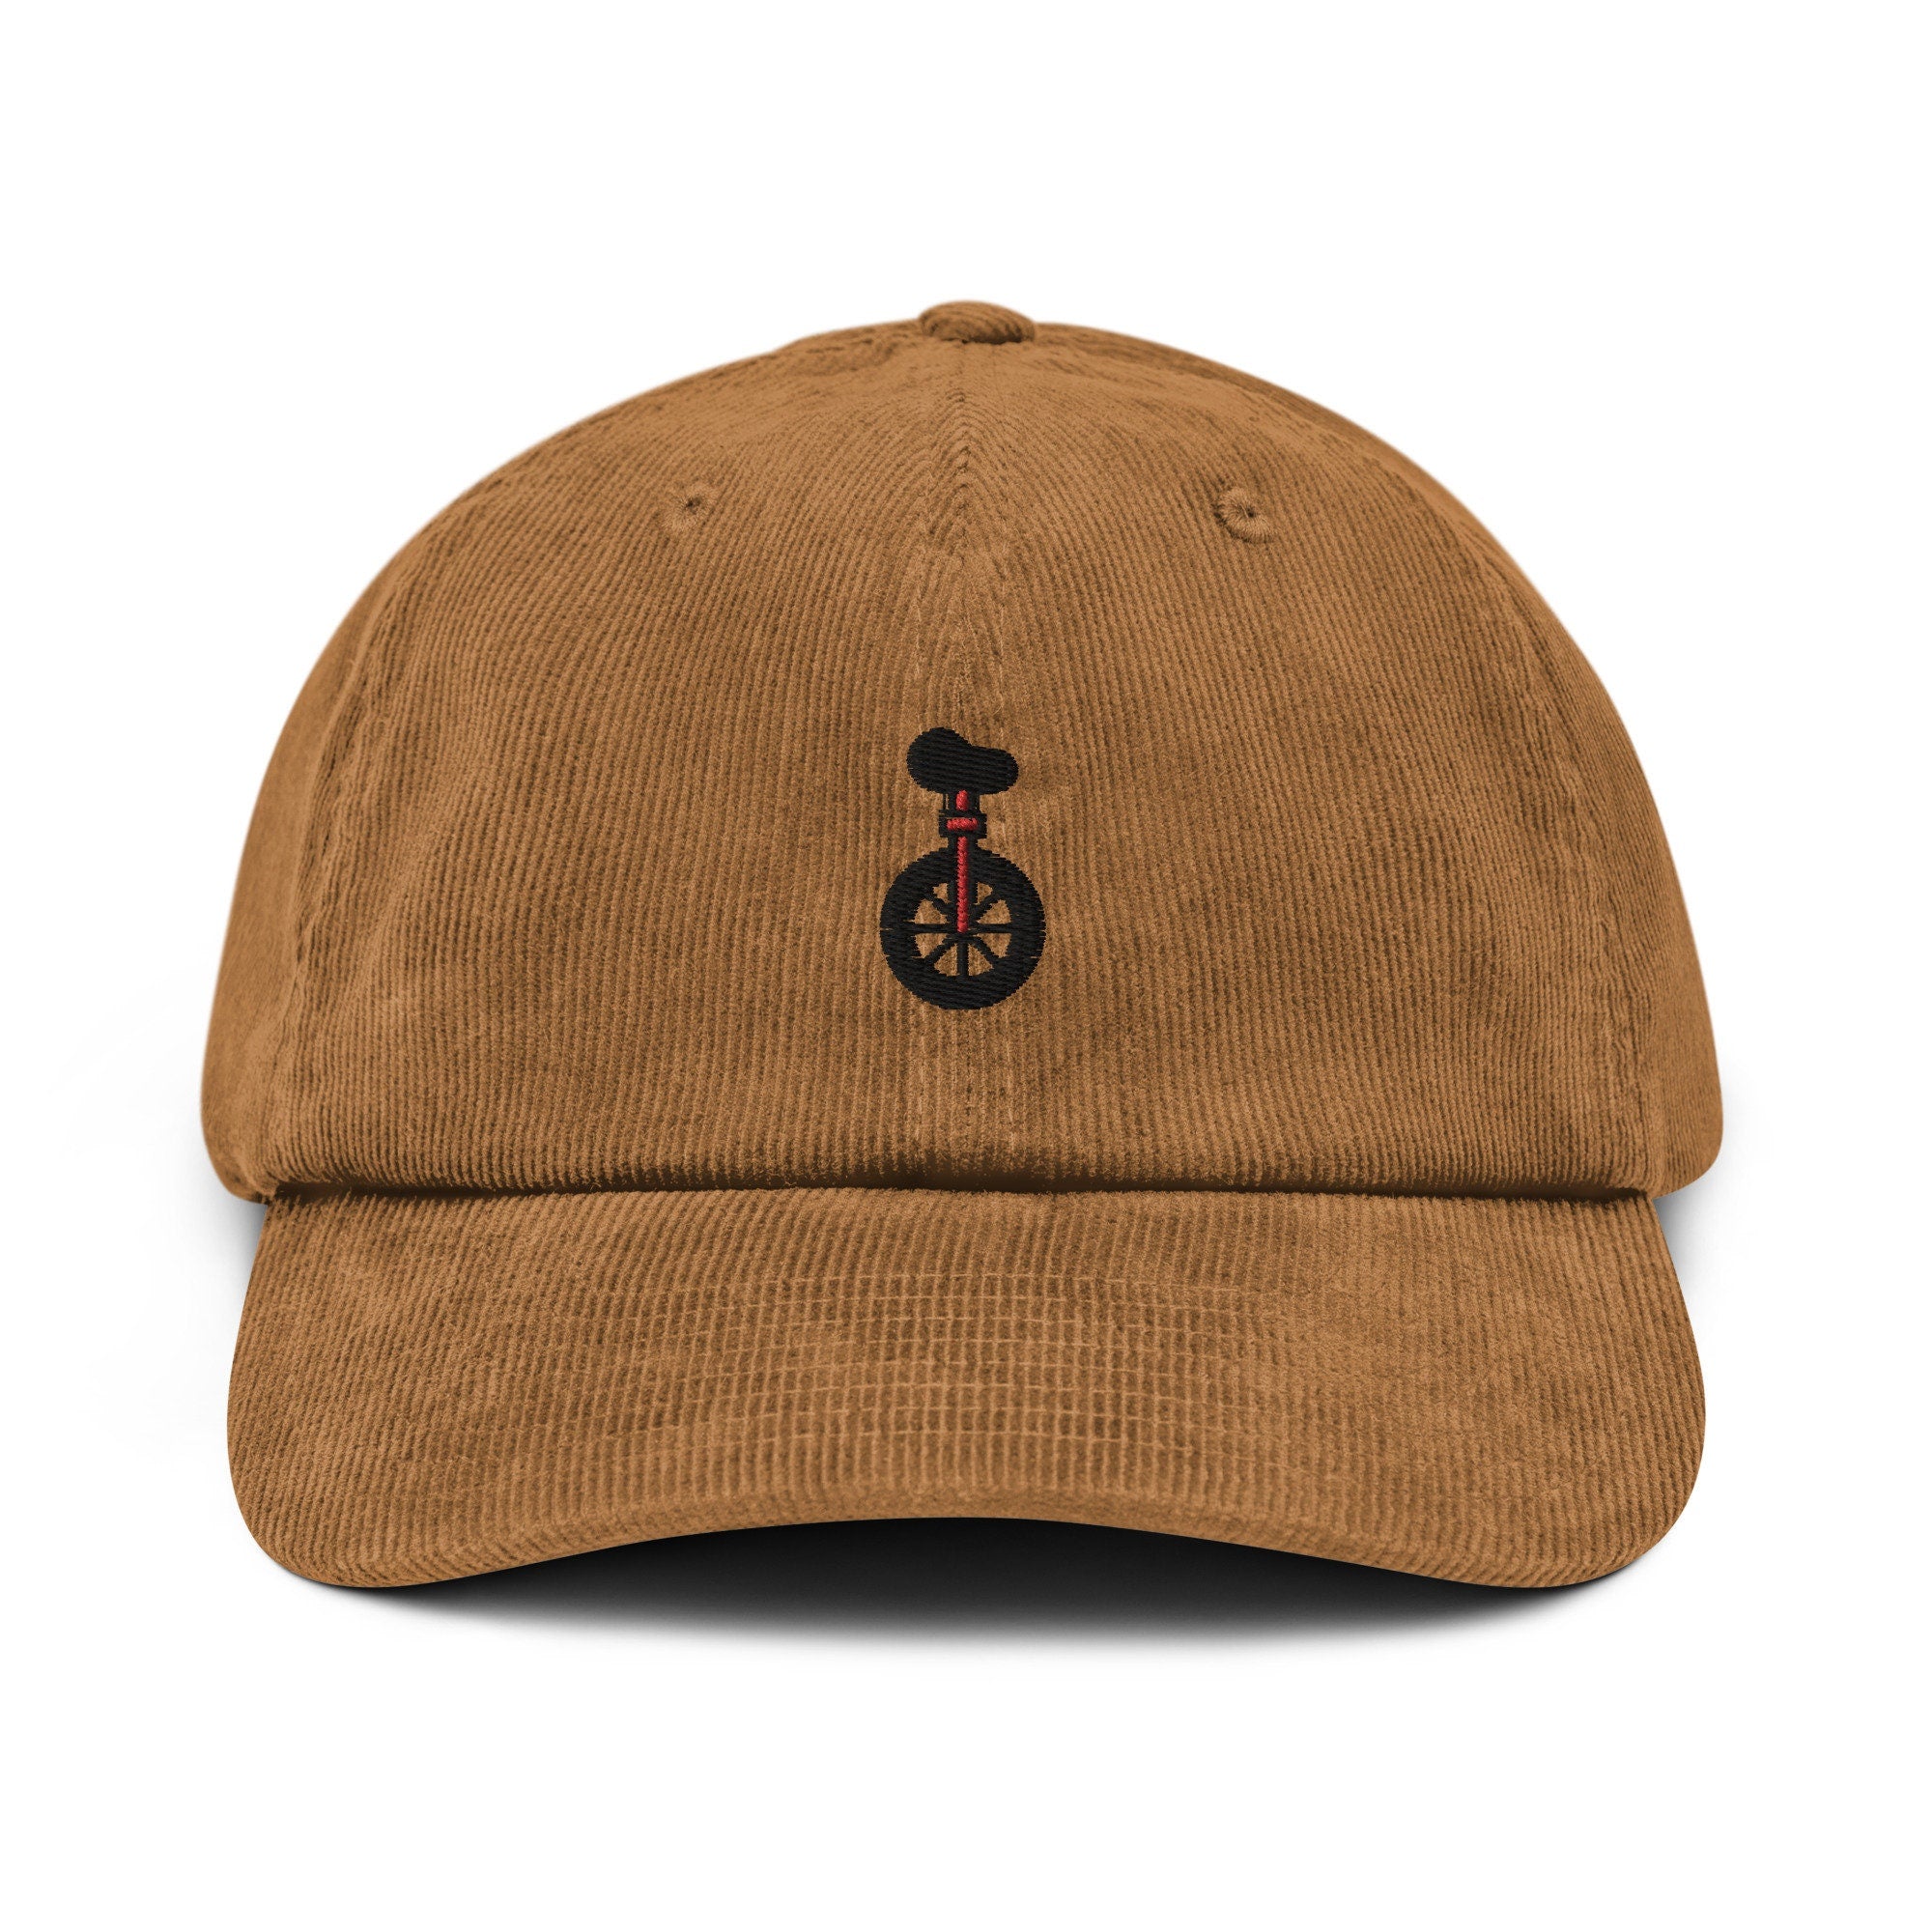 Unicycle Corduroy Hat, Handmade Embroidered Corduroy Dad Cap - Multiple Colors